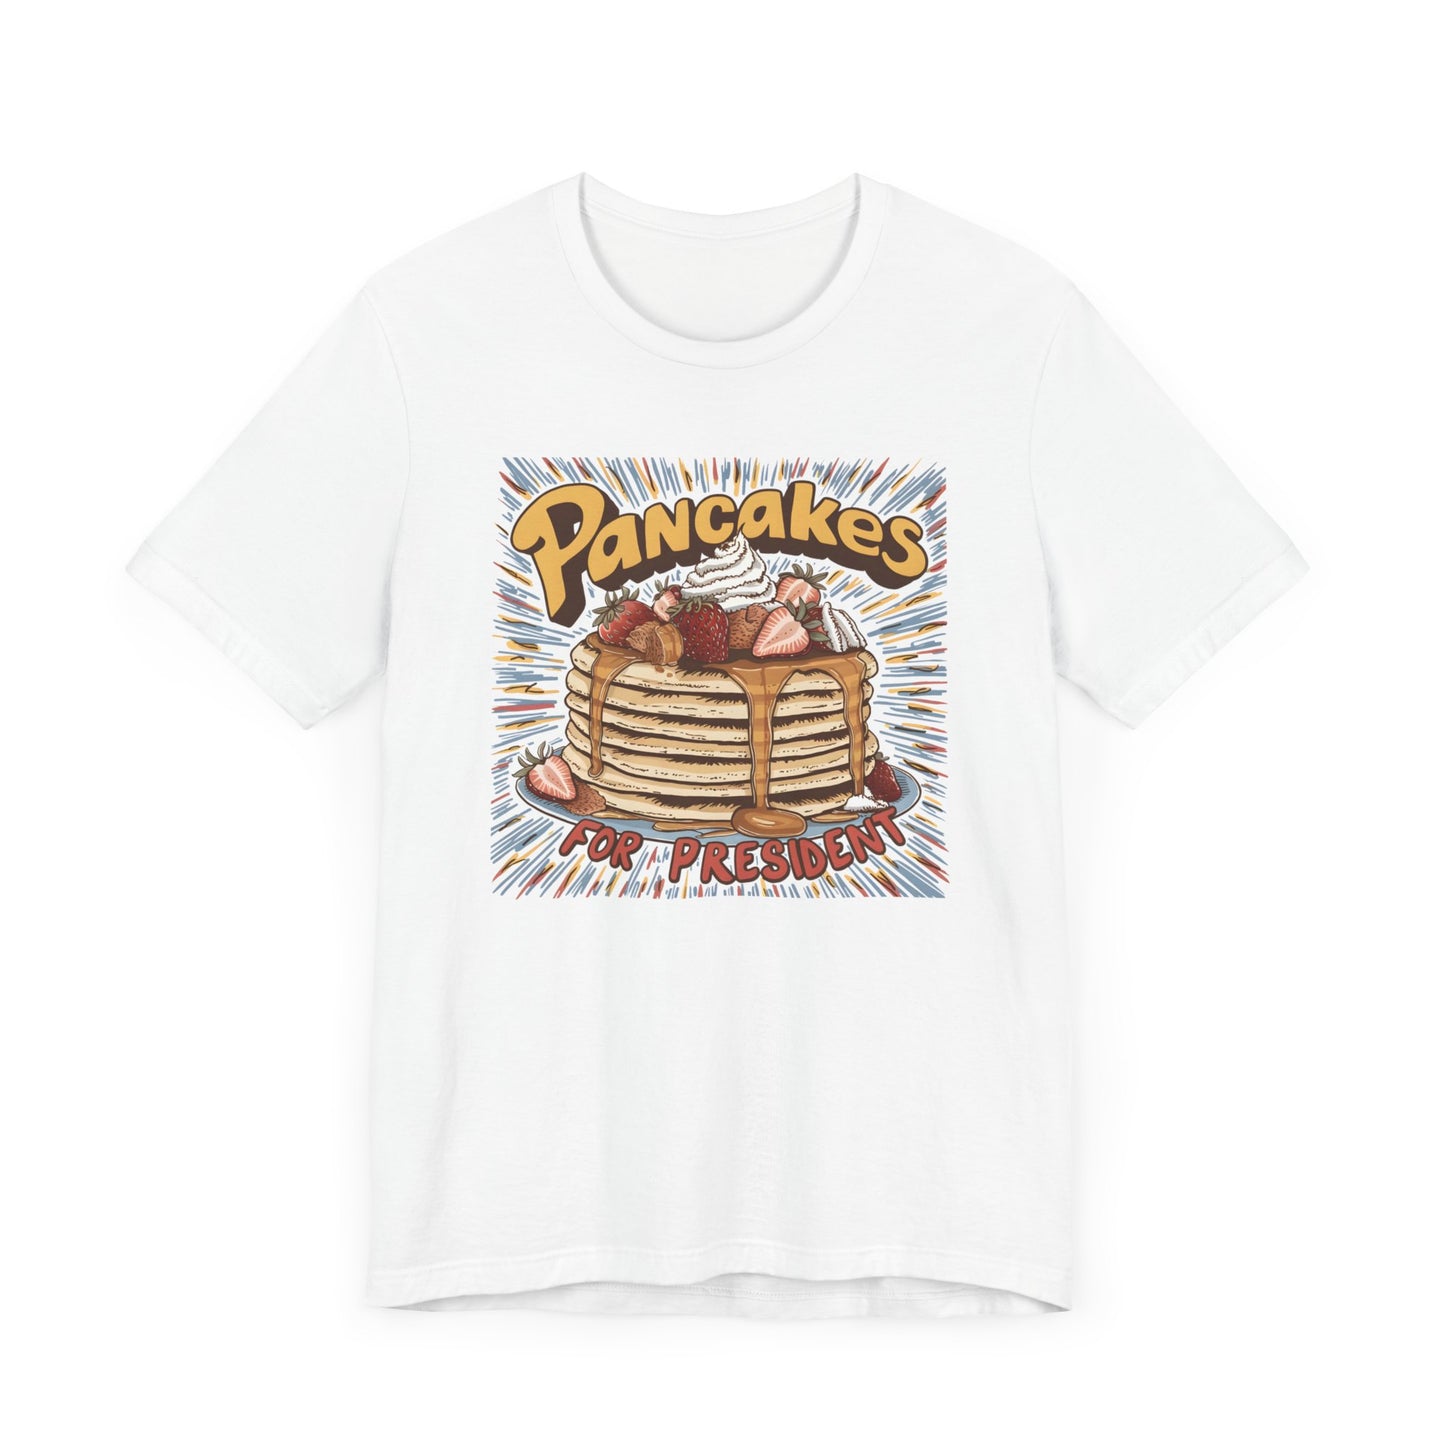 Political Parody T-Shirt with Pancakes for President, Funny Presidential Election Shirt, Election Parody Gift, Funny Political Parody TShirt